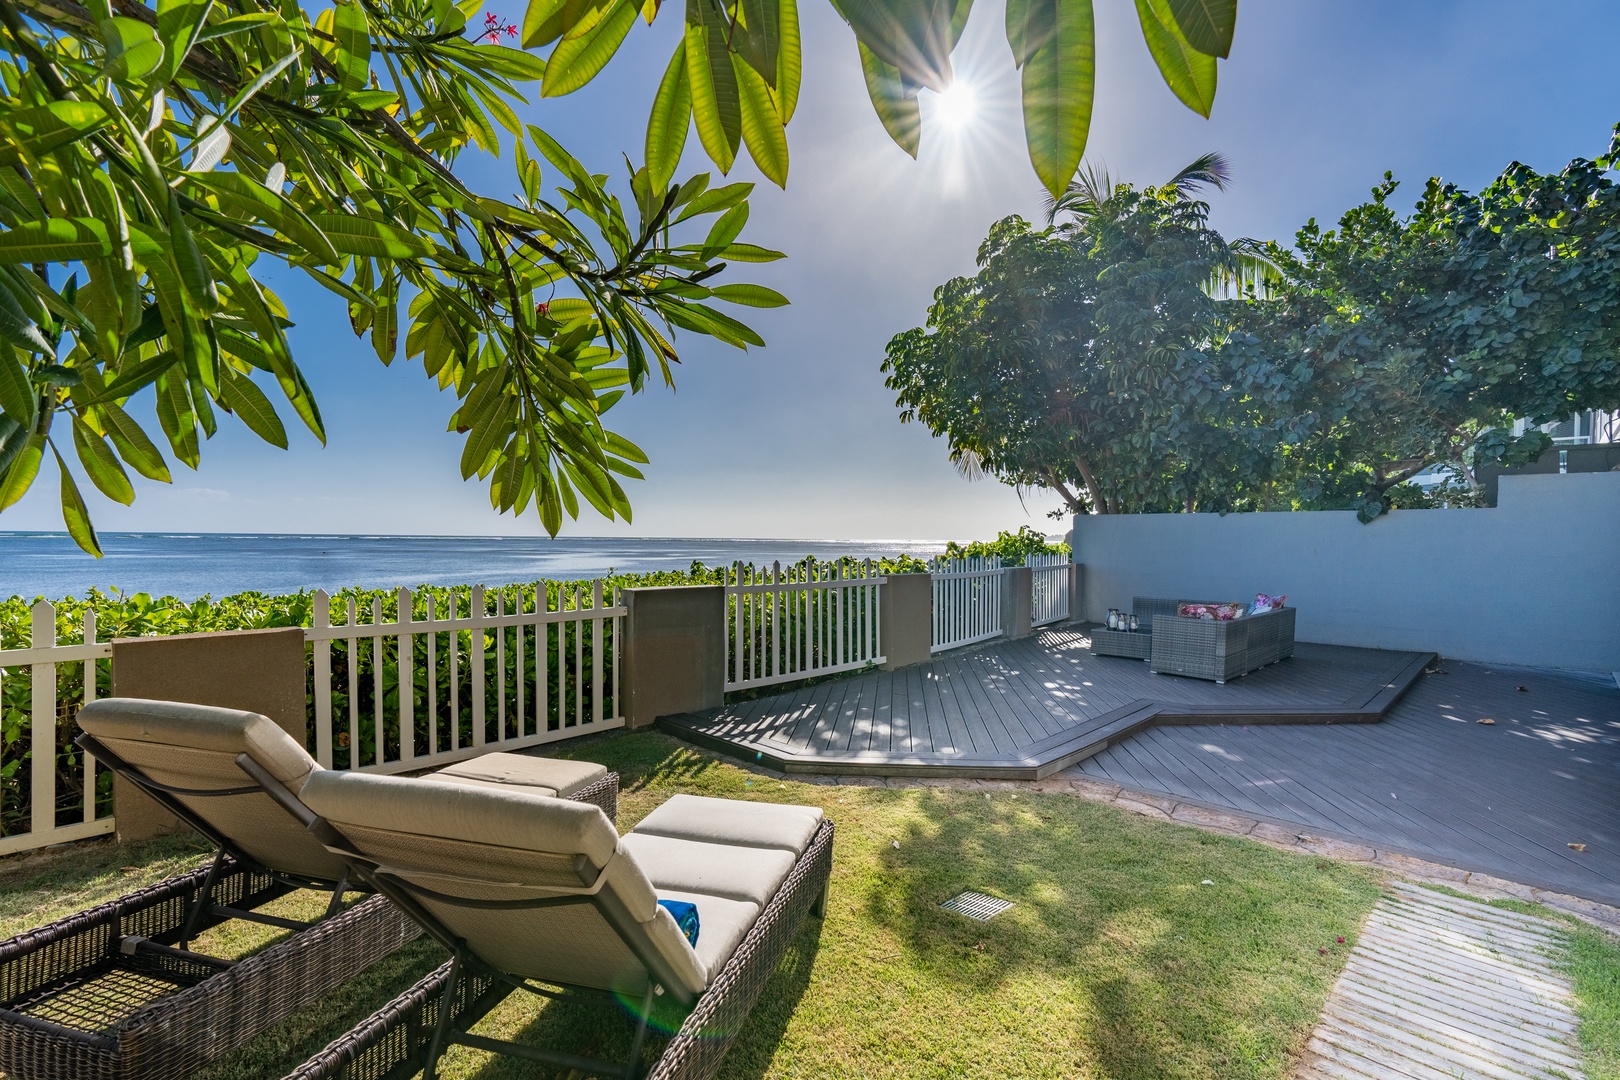 Honolulu Vacation Rentals, Wailupe Seaside - Ocean views and sunshine in private yard with lounge area.